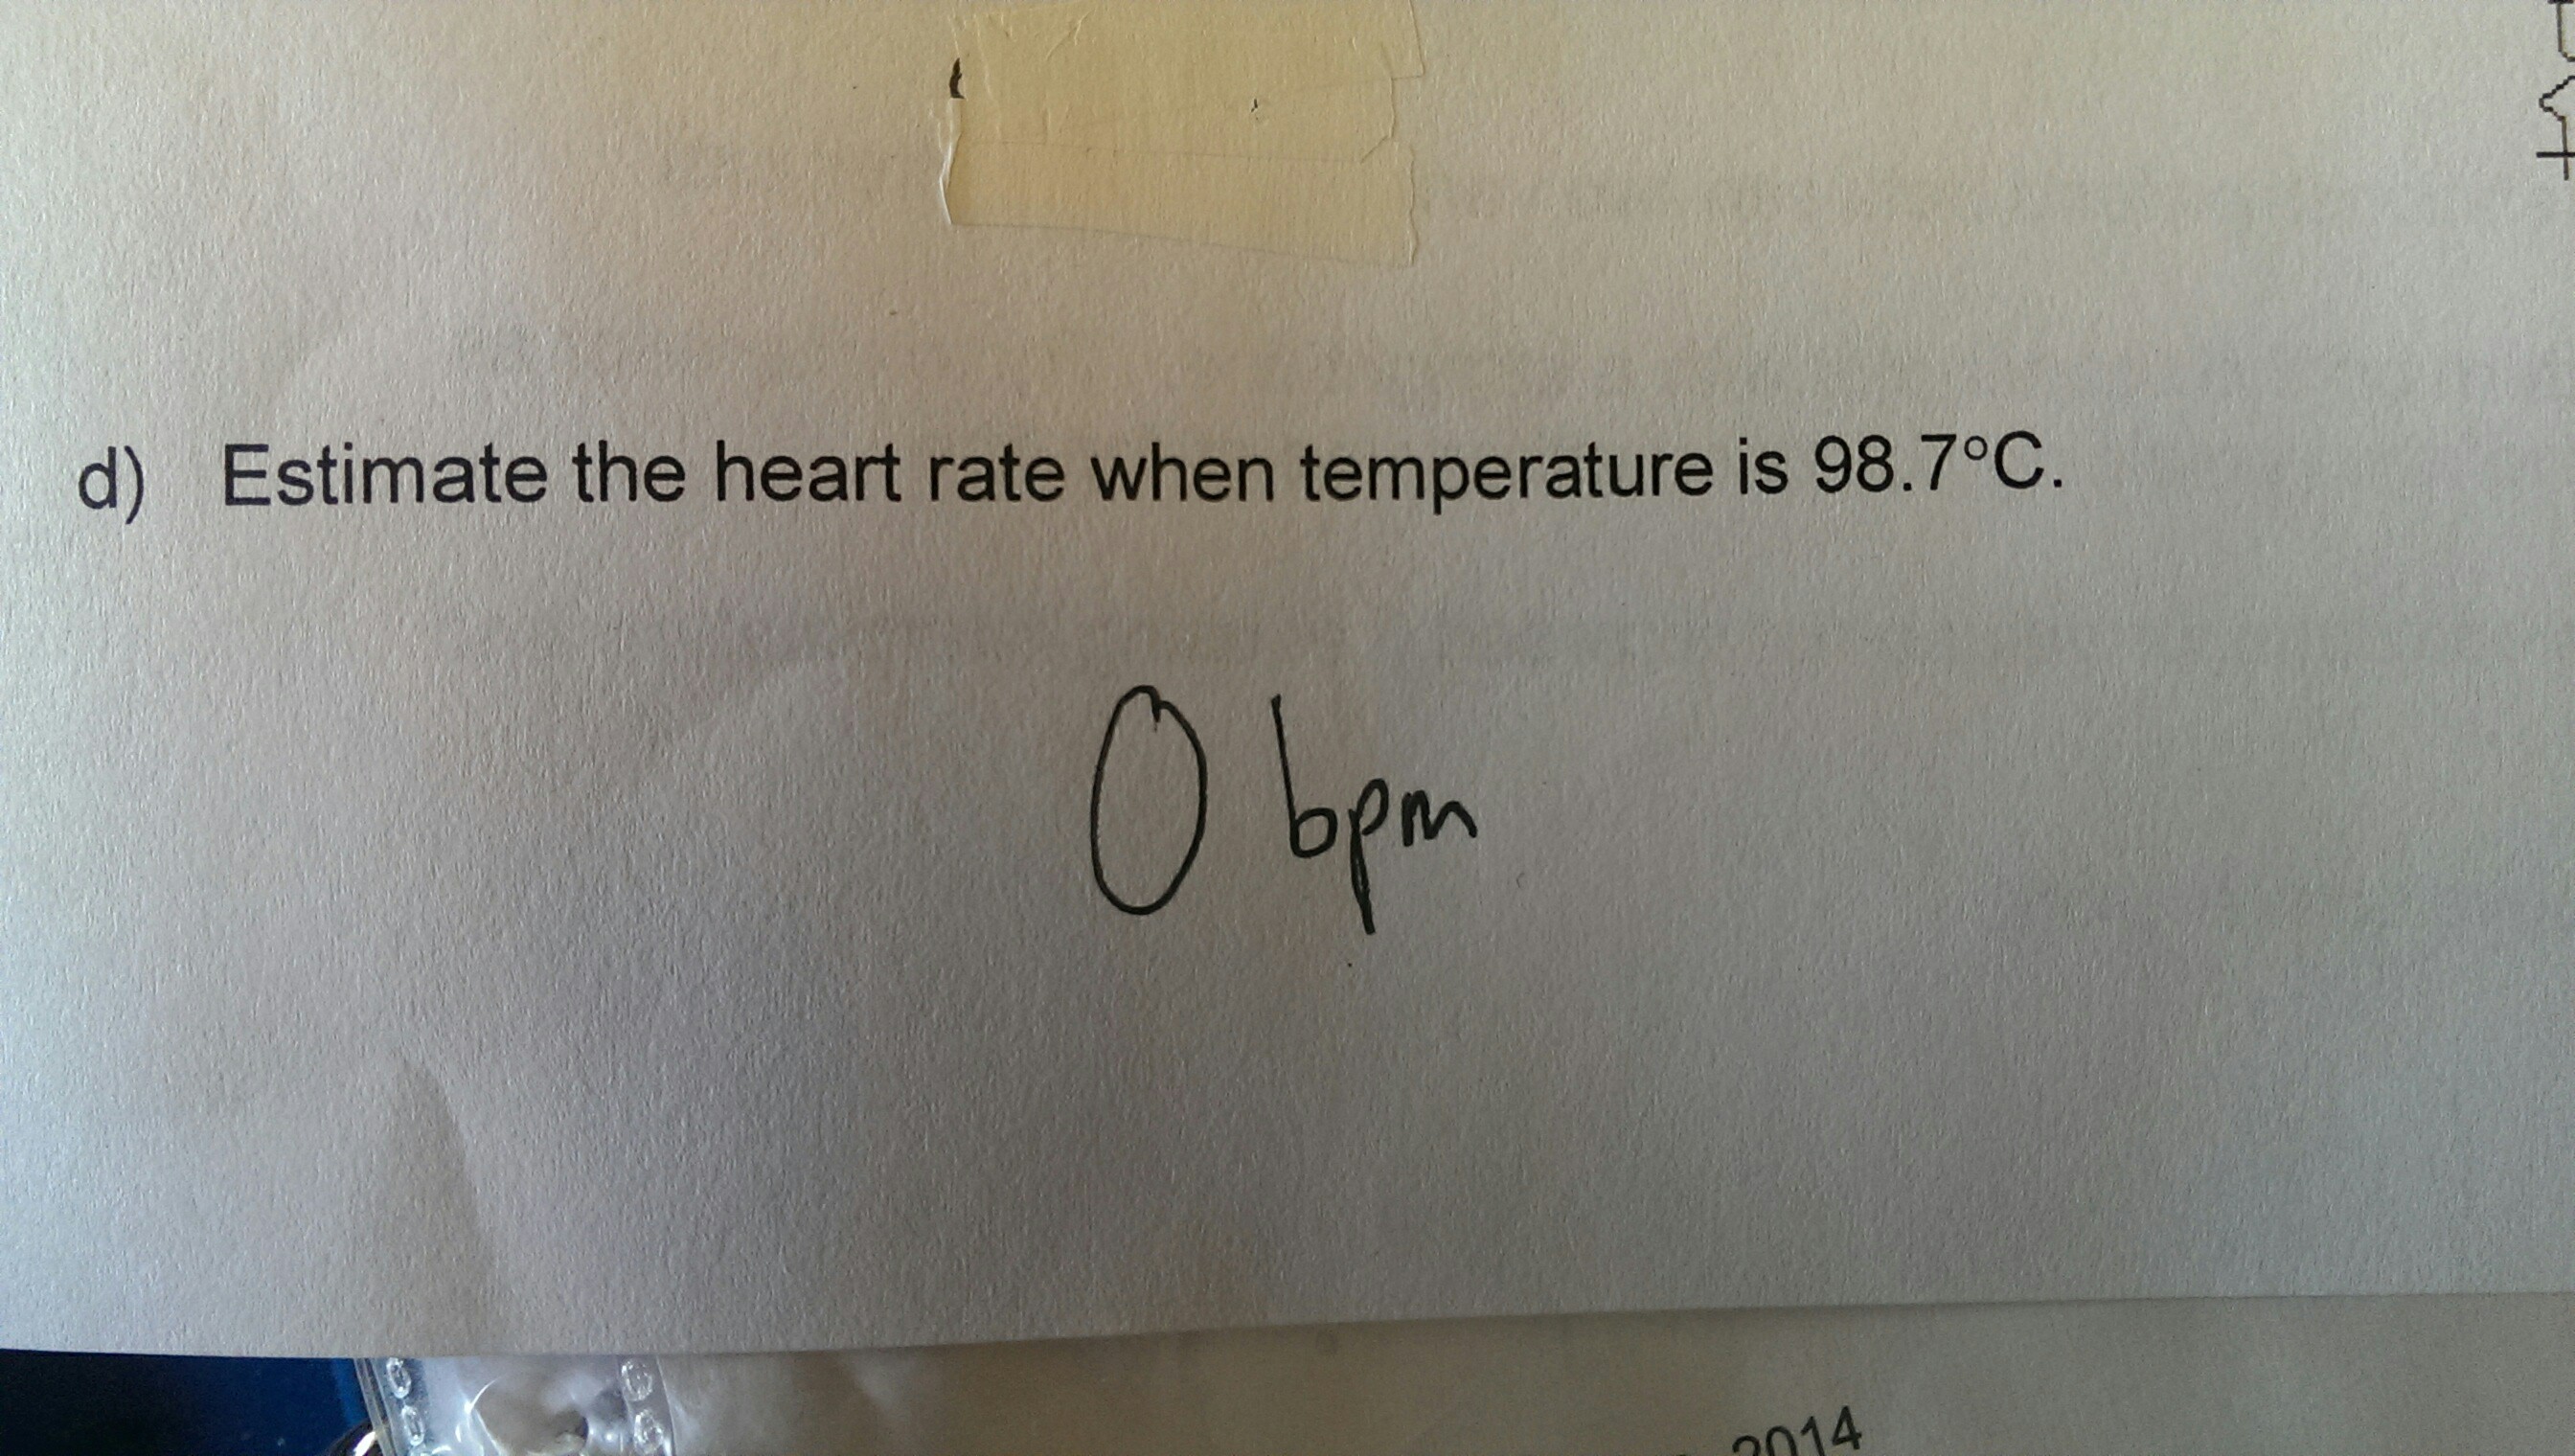 paper - d Estimate the heart rate when temperature is 98.7C. O bem 2014